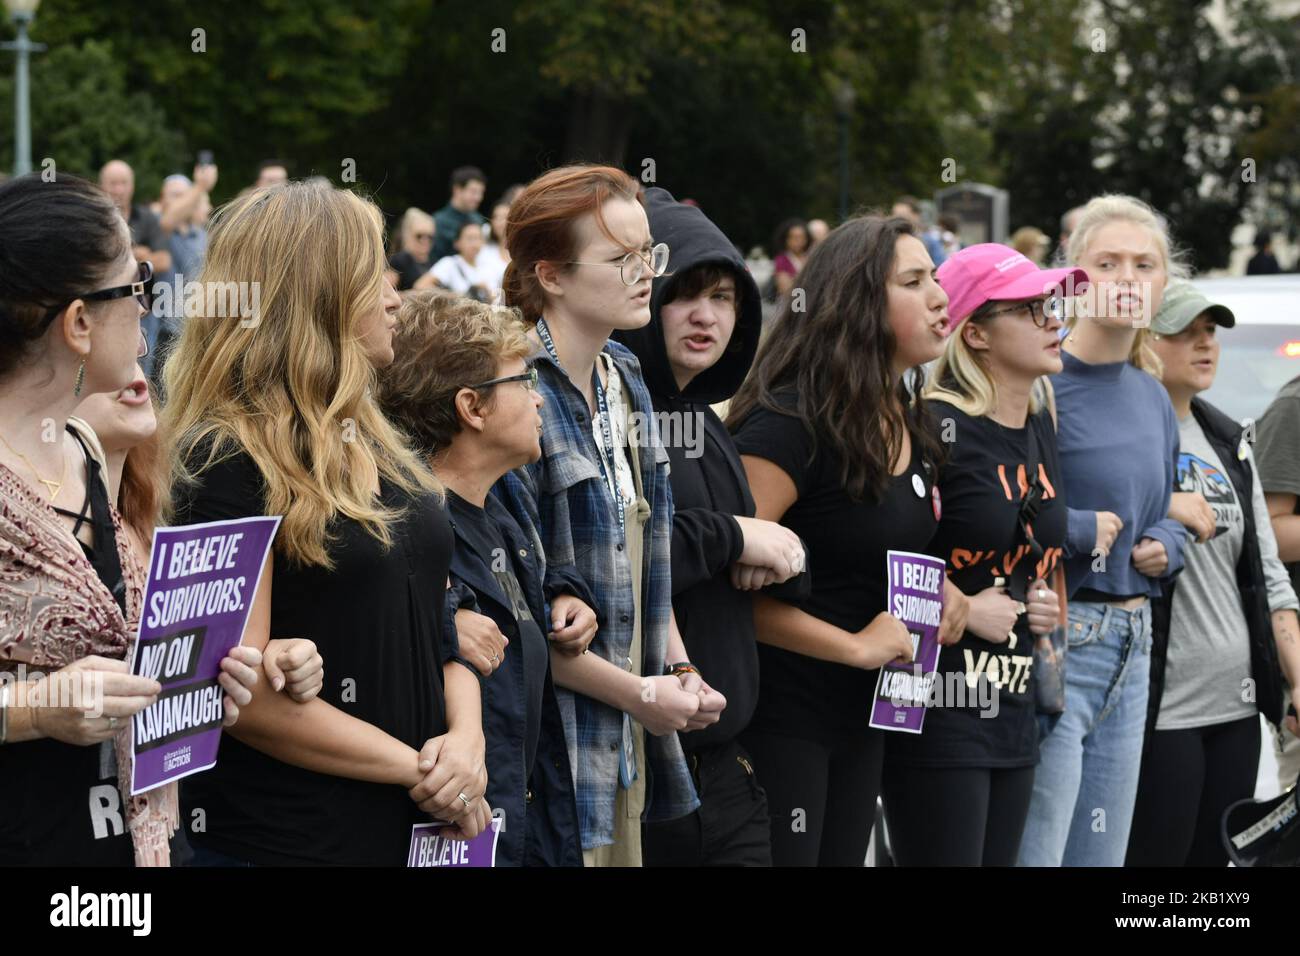 Protestors rallying against the confirmation of Judge Brett Kavanaugh rally on the steps of the US Supreme Court and the US Capitol, in Washington, D.C., on October 6, 2018. (Photo by Bastiaan Slabbers/NurPhoto) Stock Photo